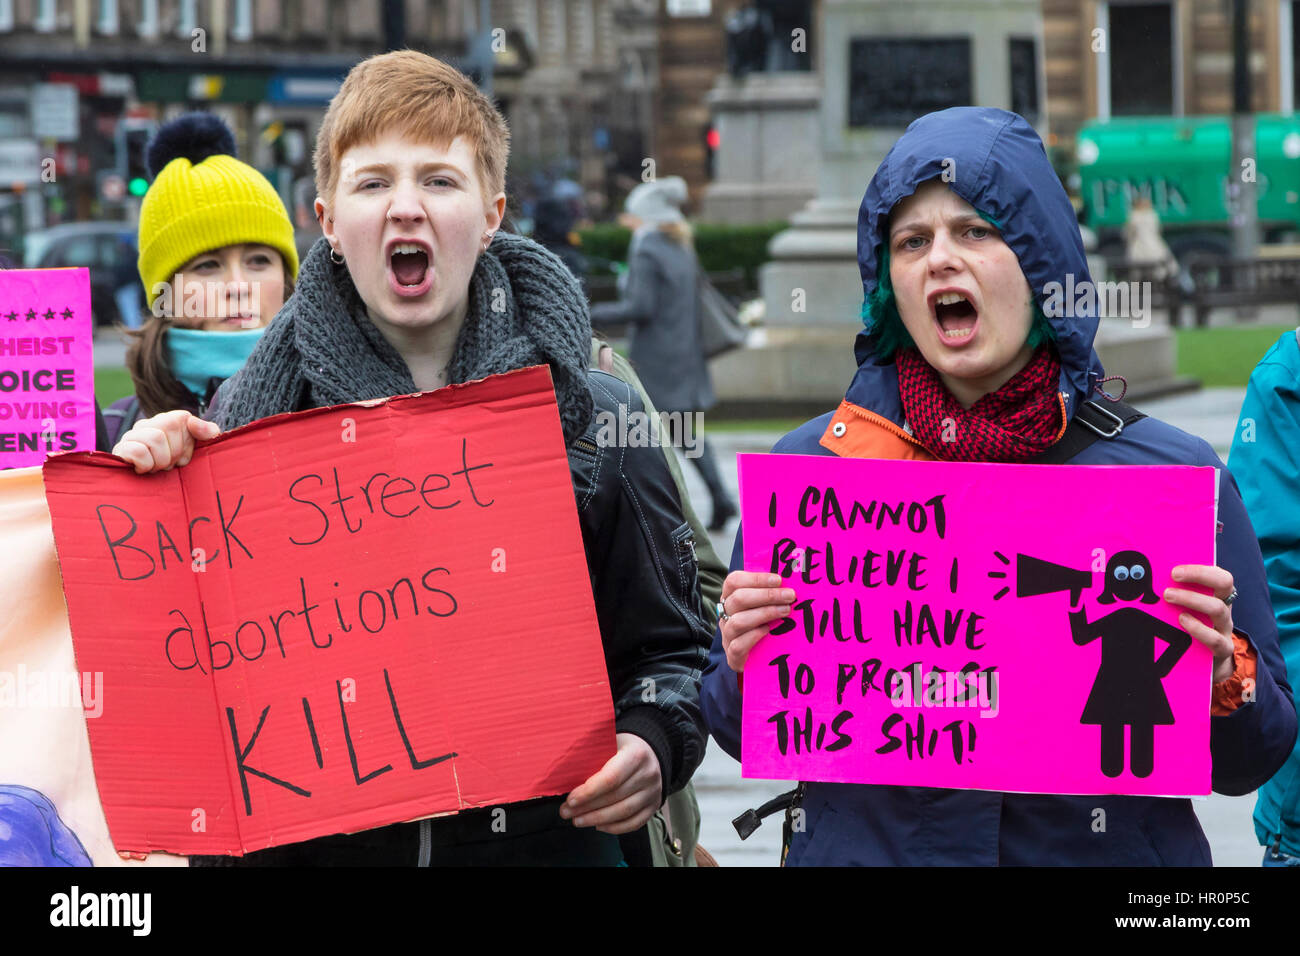 Glasgow, Scotland, UK. 25th Feb, 2017. "40 Days for Life", a Christian Pro-Life and anti abortion group held a prayer meeting in George Square, Glasgow, in preparation for 40 days of prayer, beginning on Ash Wednesday (1 March) and ending on Palm Sunday (9 April), hoping to have the Scottish Executive repeal the Abortion Act 1967. The prayer meeting was confronted by counter demonstration of activists promoting international womens' rights and advocating the "Right to Choose" Credit: Findlay/Alamy Live News Stock Photo